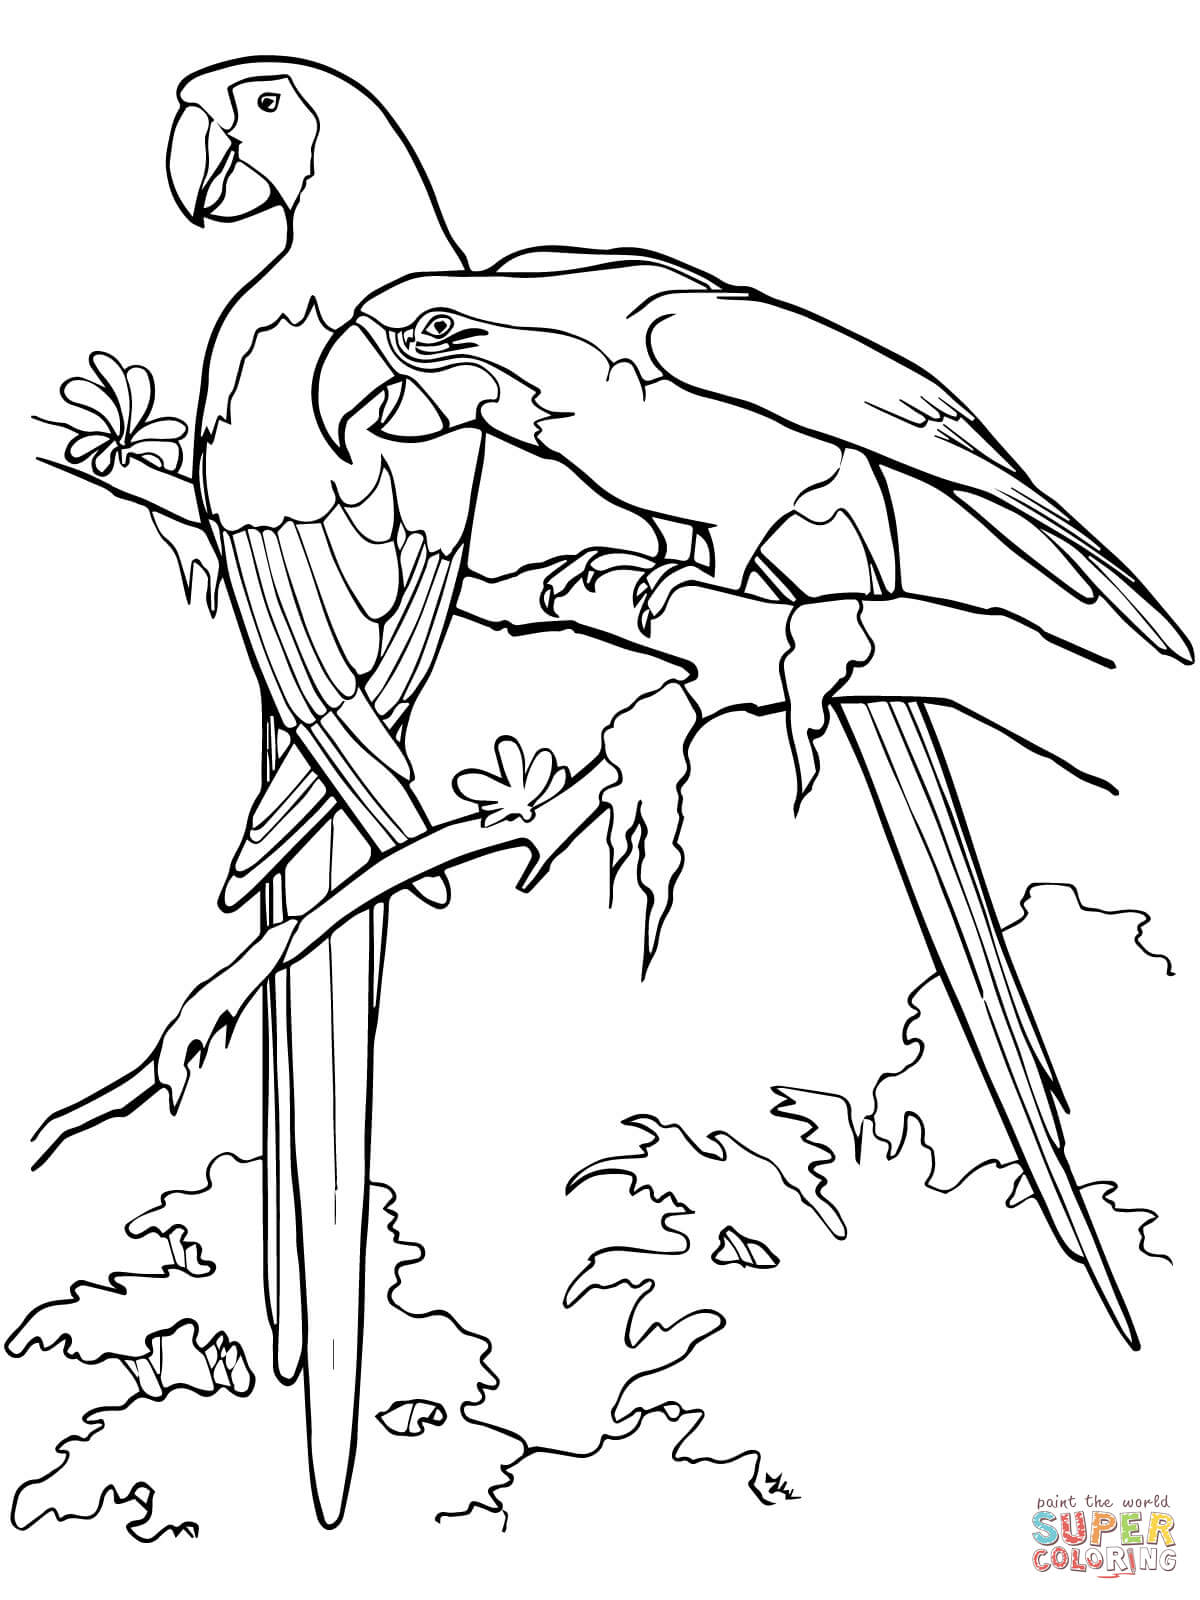 Scarlet Macaws coloring page | Free Printable Coloring Pages